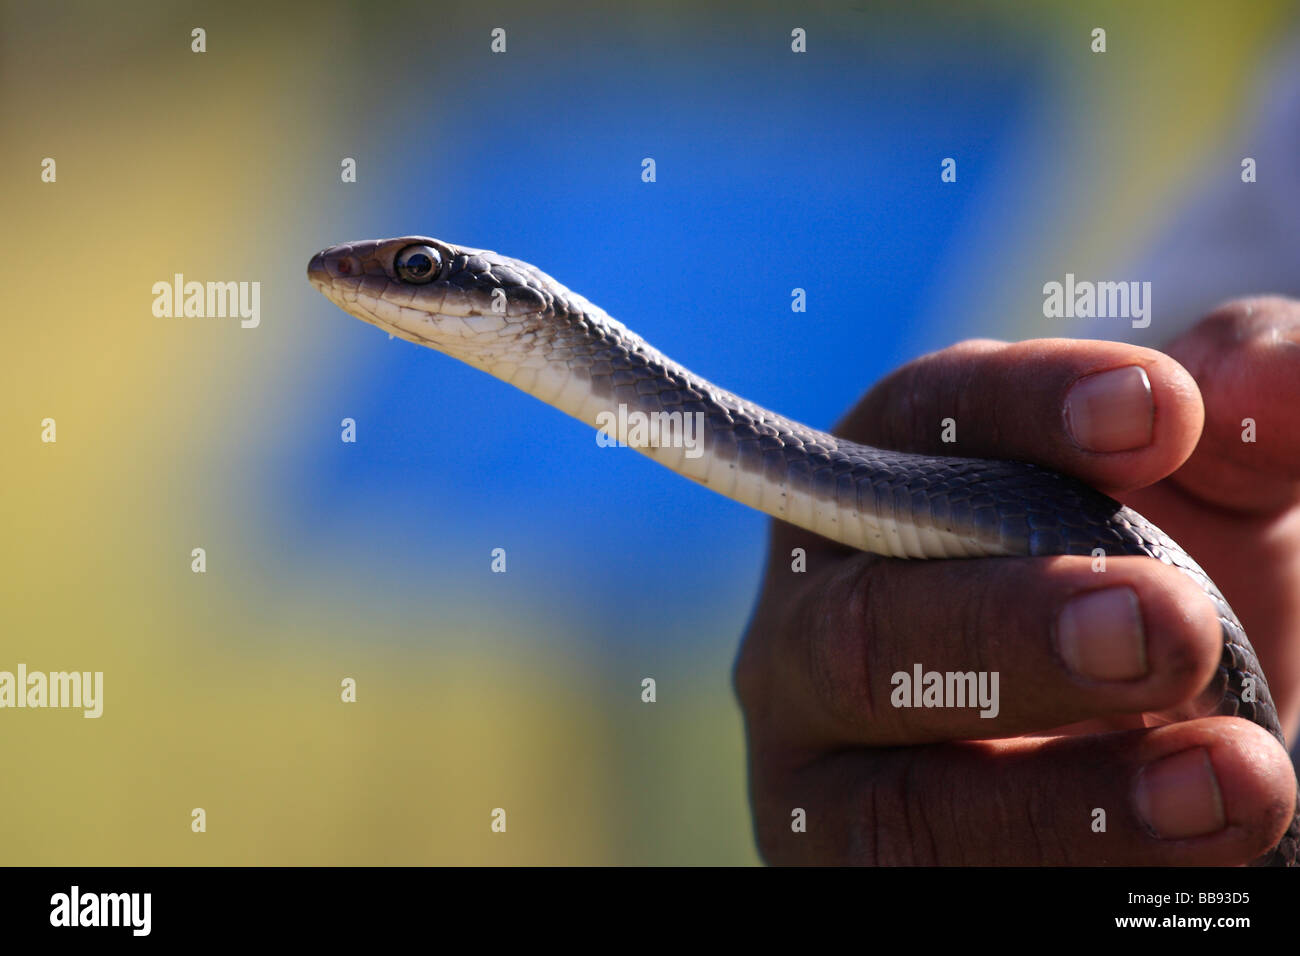 Close up photo of a Florida 'Black Racer' snake being held. Stock Photo